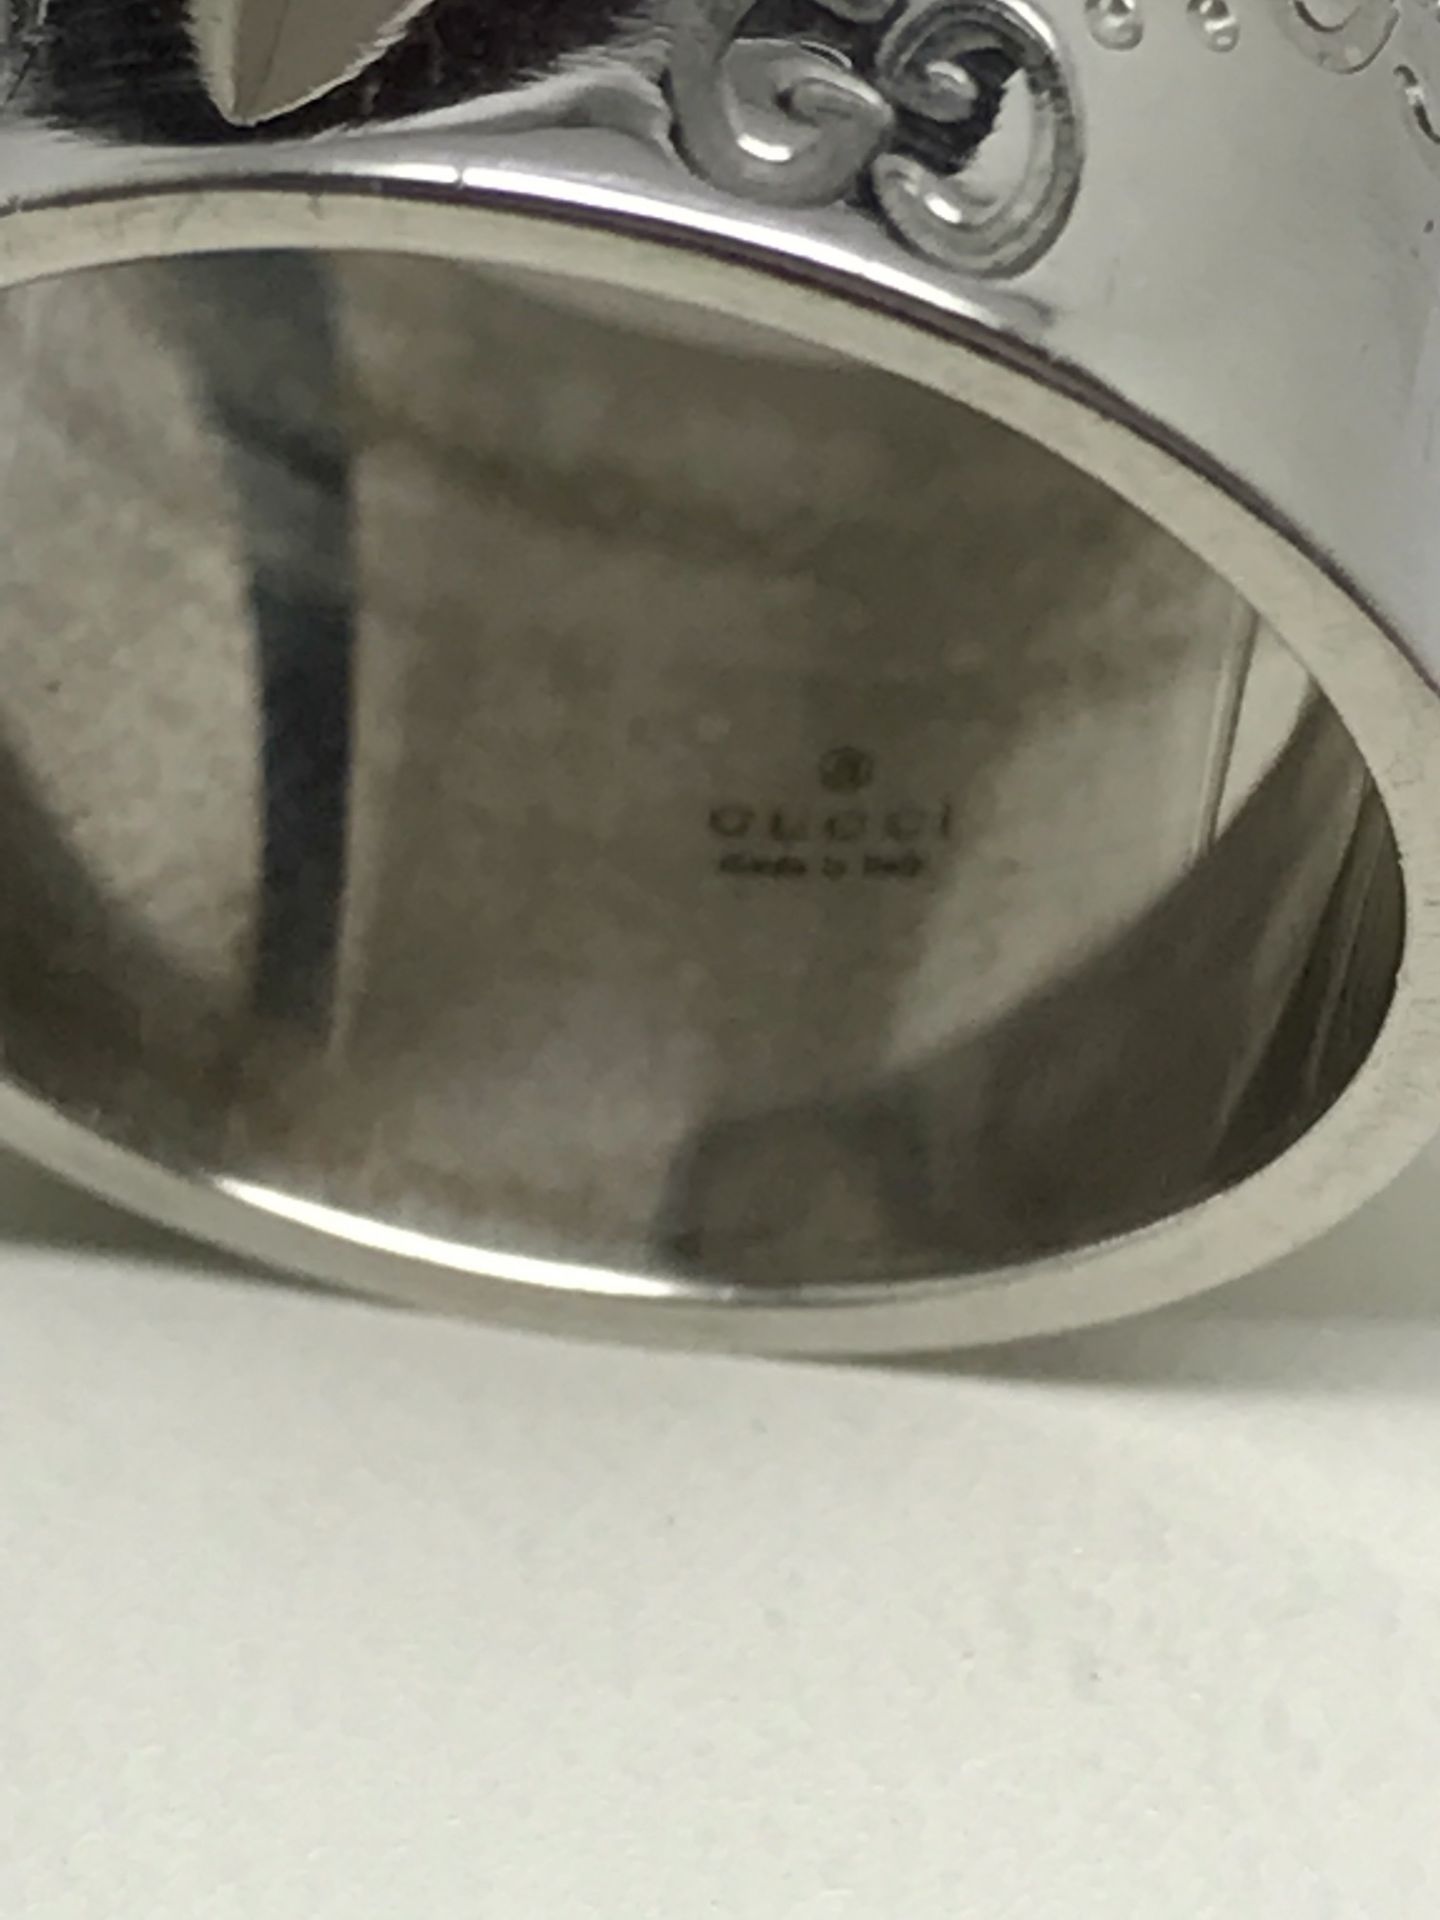 18ct WHITE GOLD GUCCI BAND - Image 3 of 4